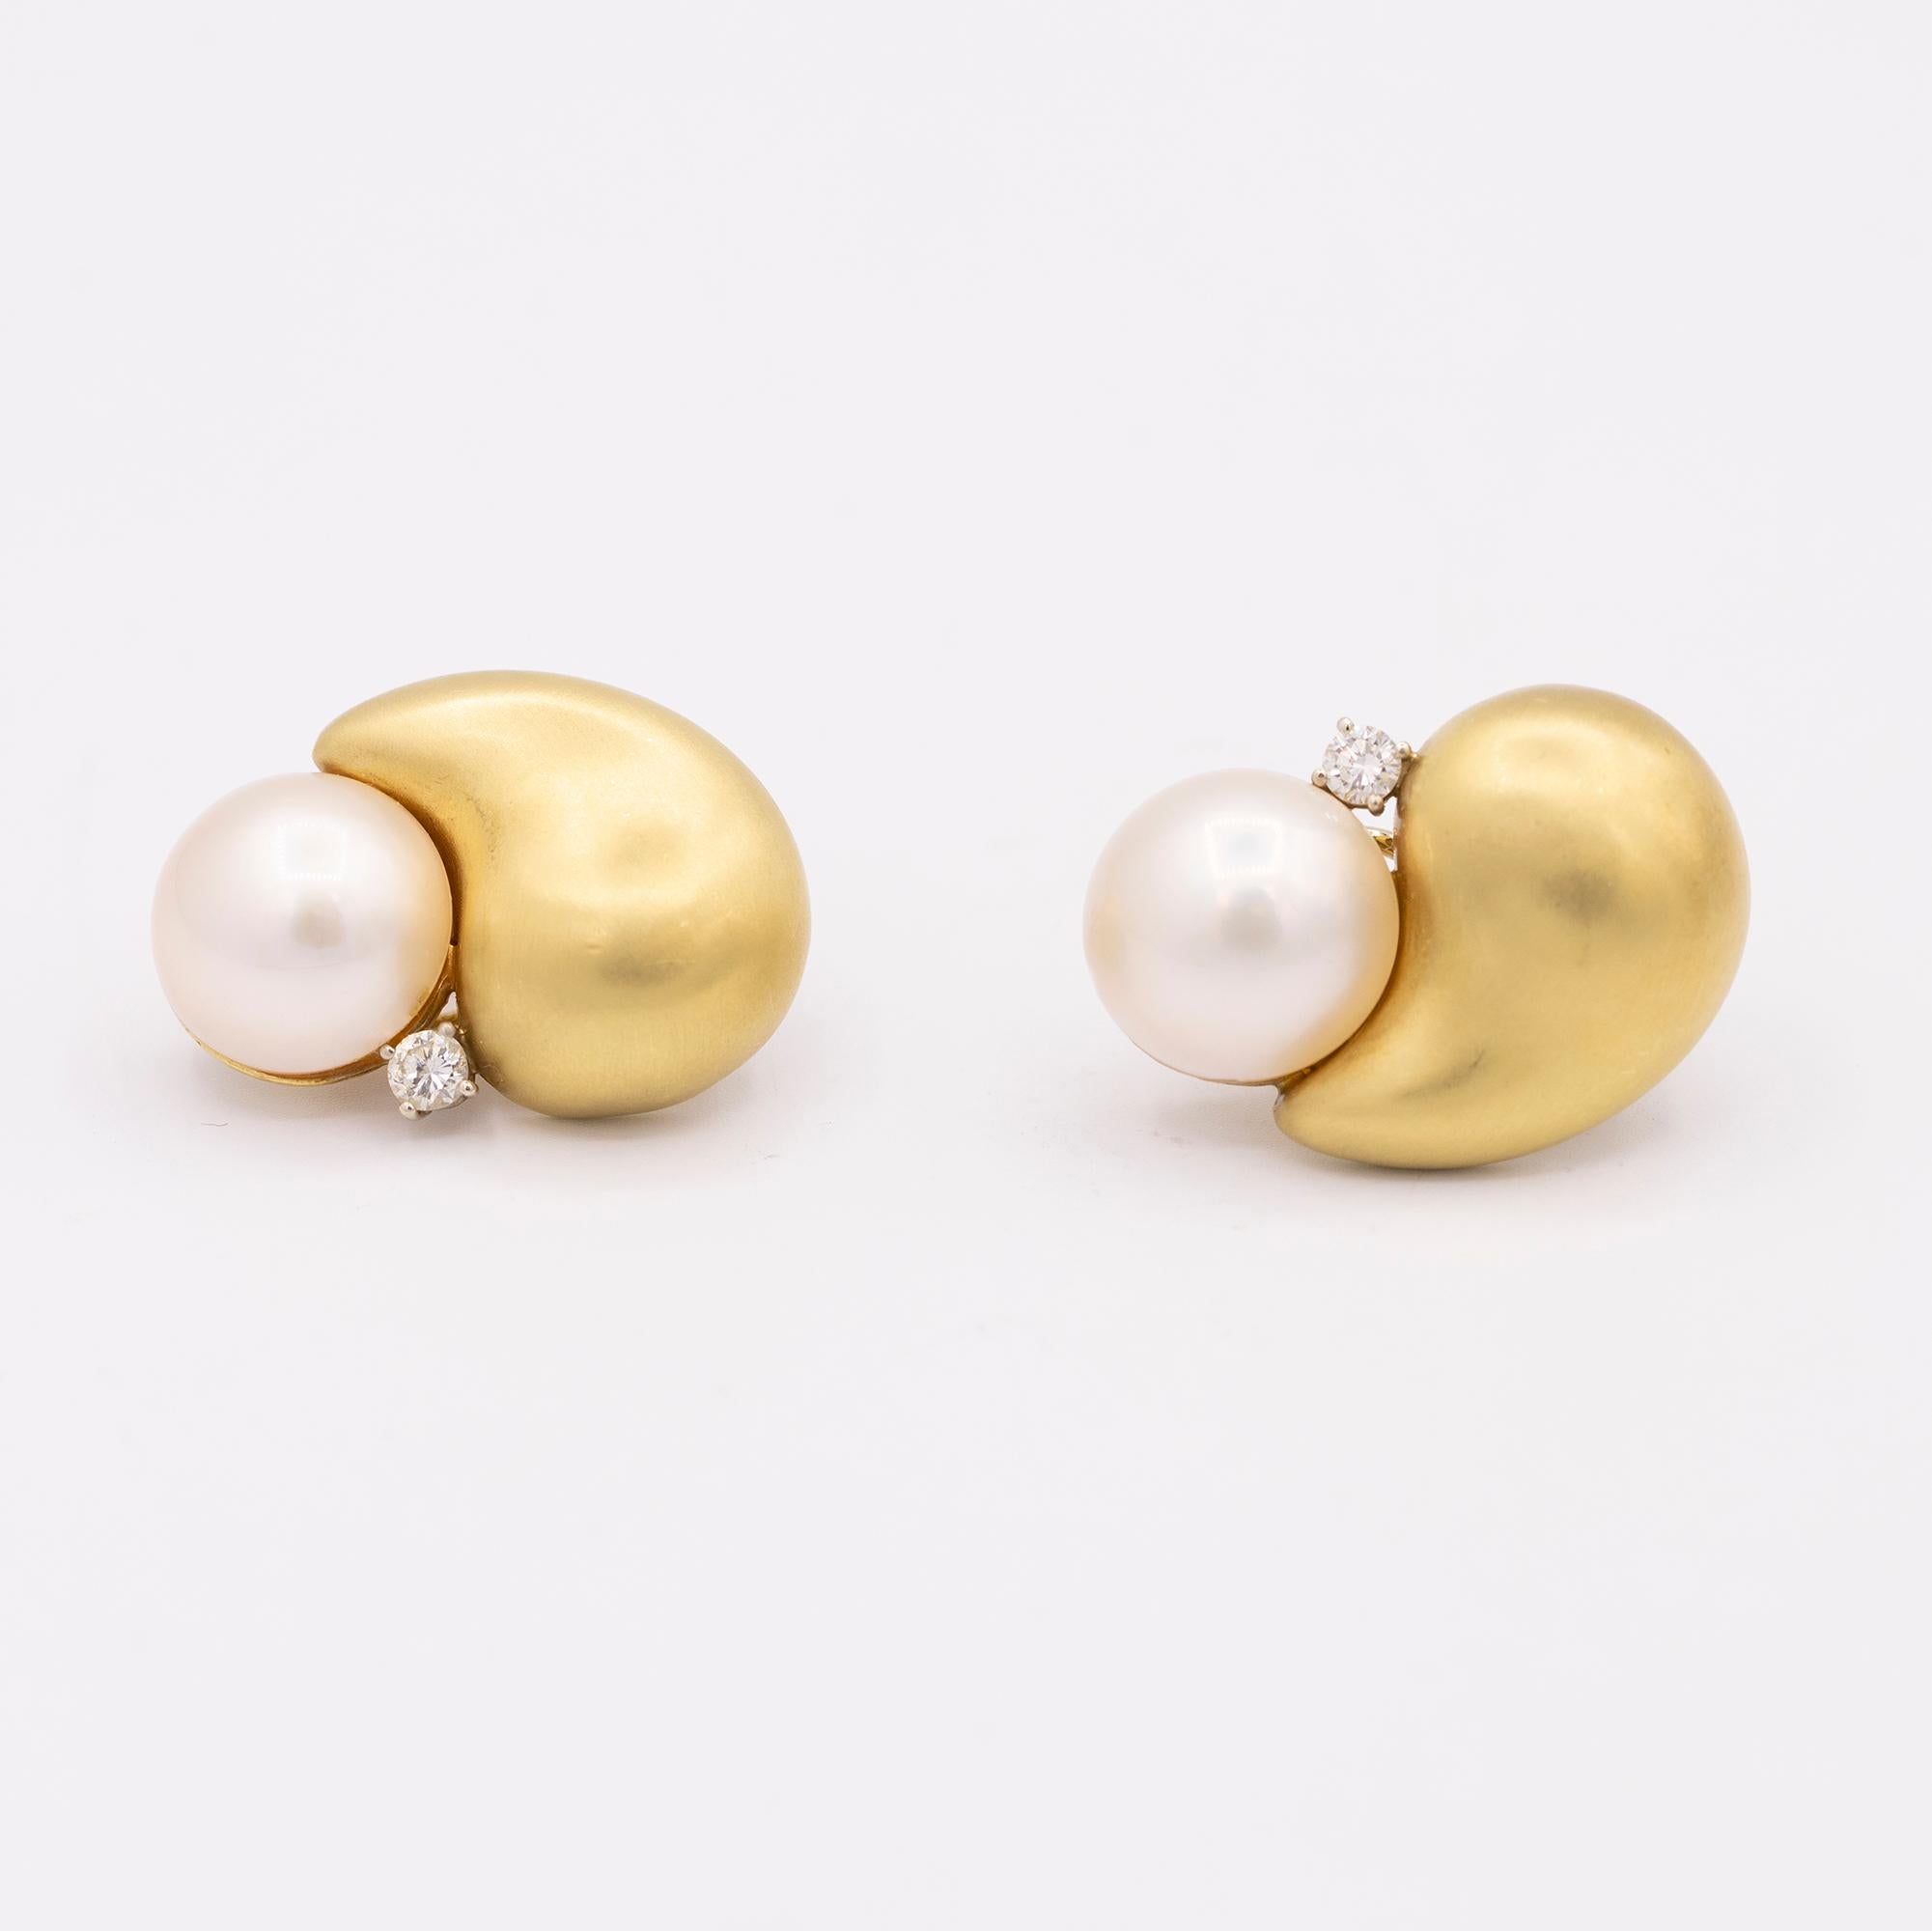 Vintage 18k yellow gold Marlene Stowe mabe pearl and diamond clip post earrings.
The satin finish gold is kidney shaped with a round mabe pearl and a round brilliant cut diamonds.

